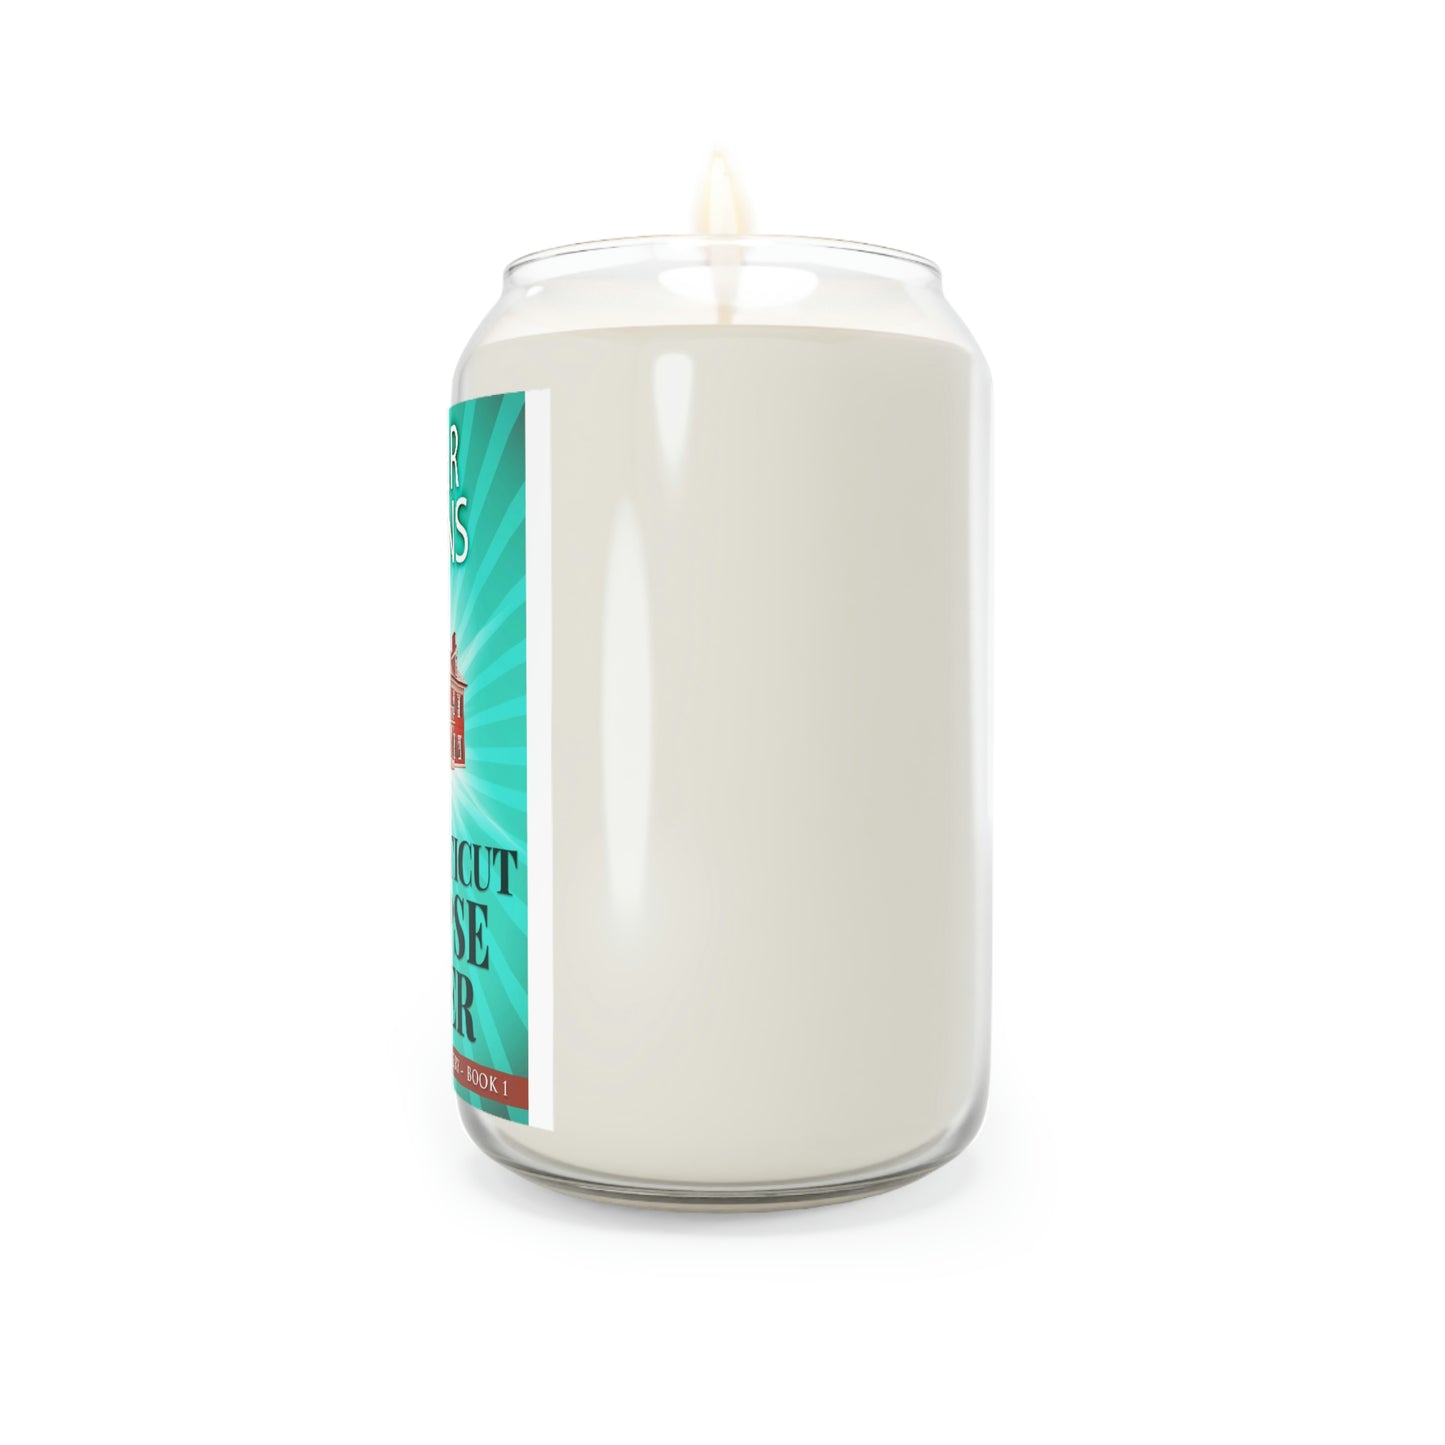 The Connecticut Corpse Caper - Scented Candle